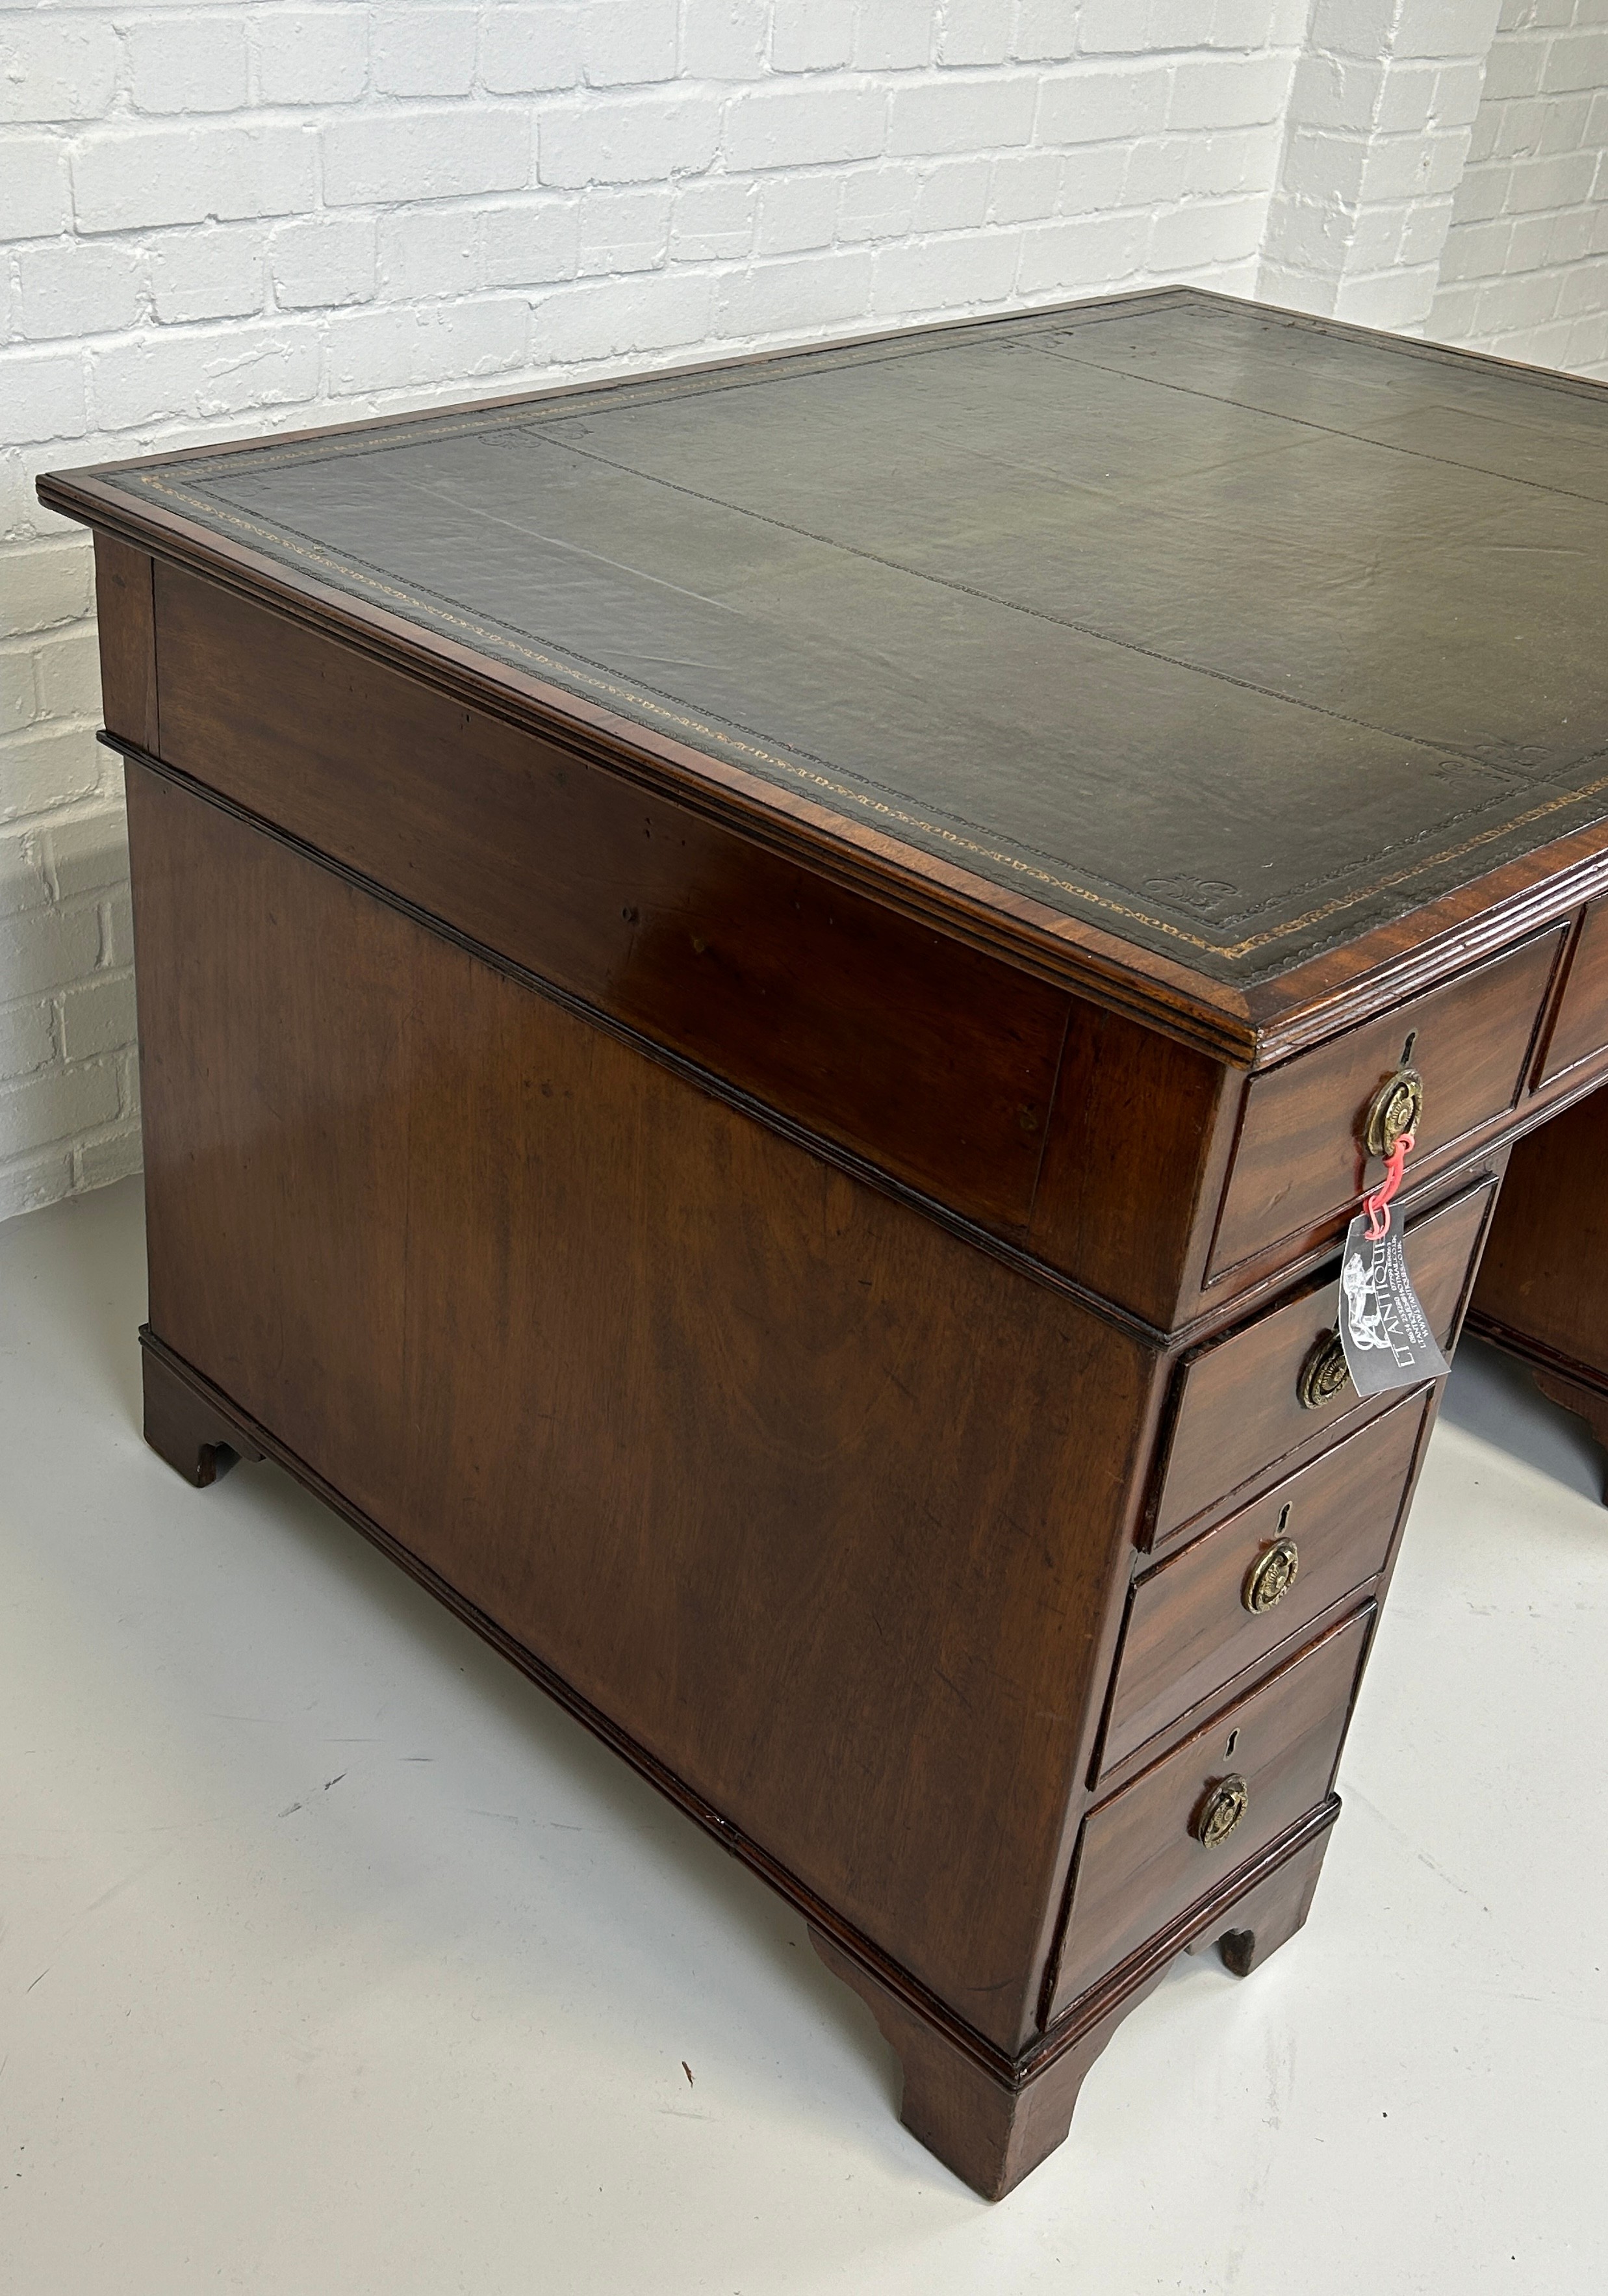 AN EARLY 19TH CENTRAL PARTNERS DESK, Two pedestals, each with ten drawers with brass handles. - Image 4 of 12